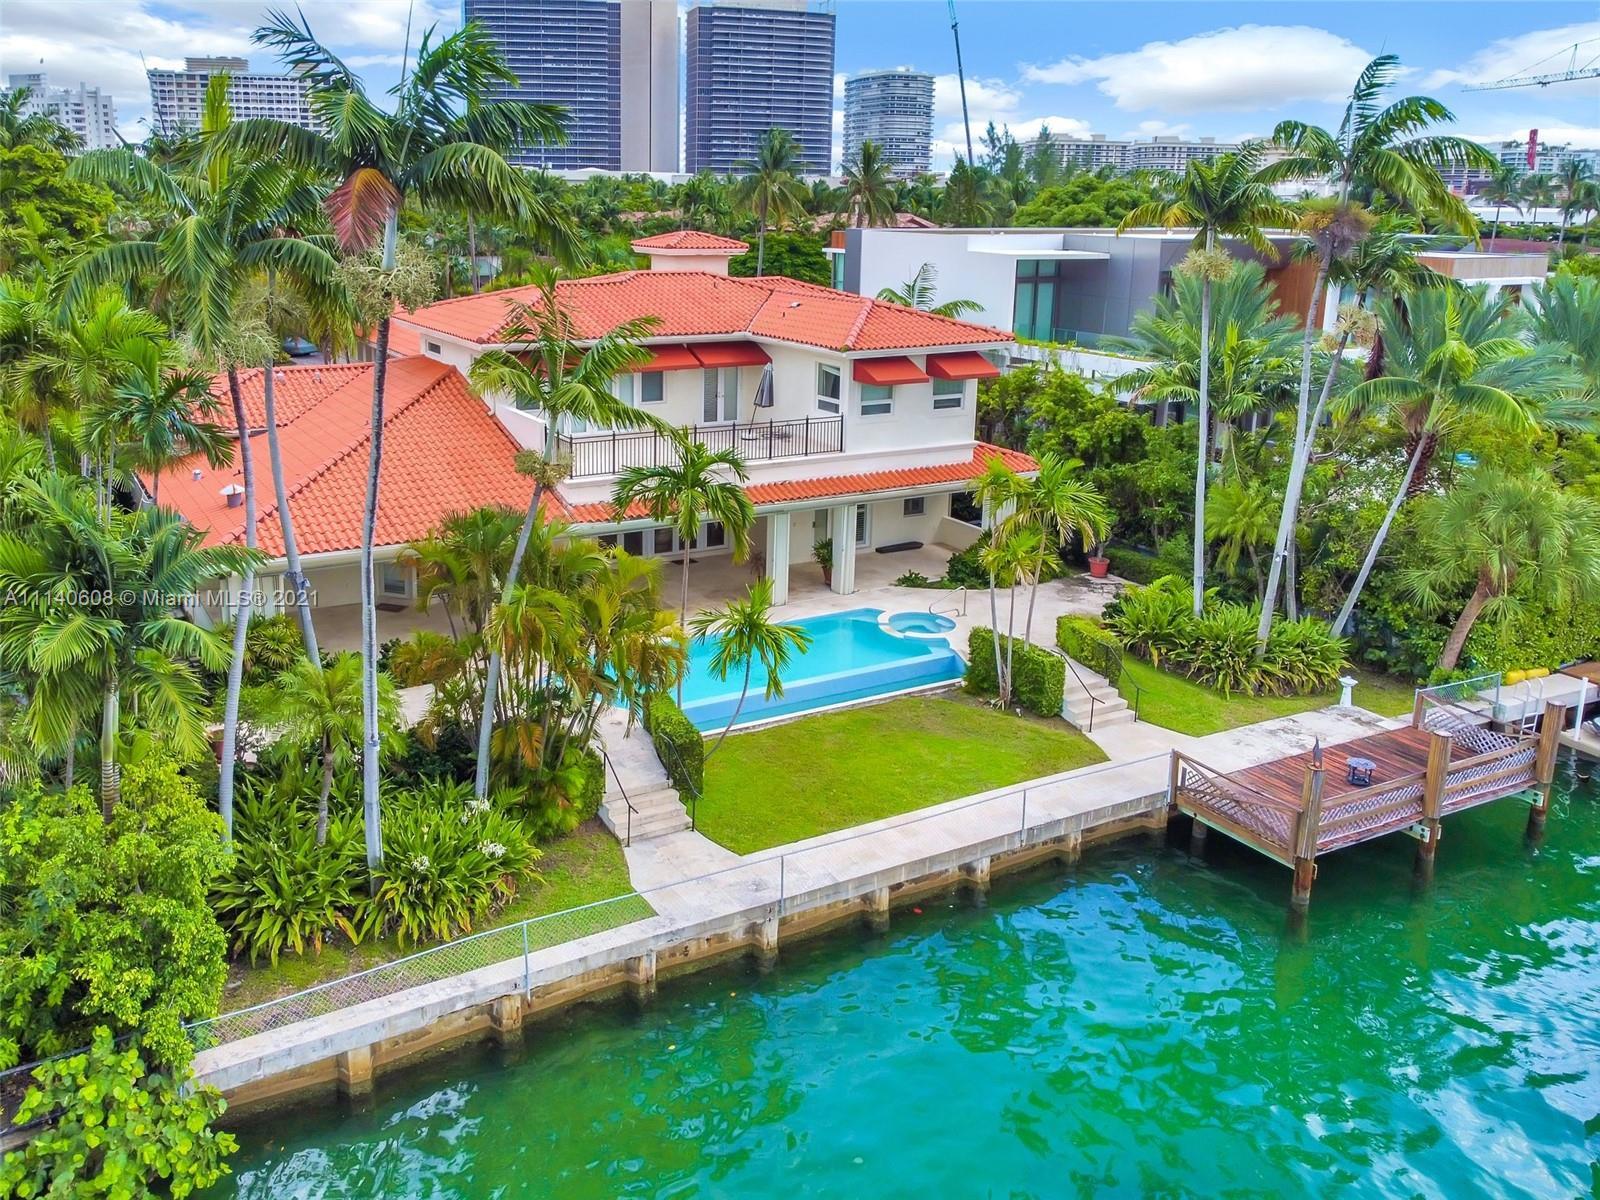 Unique opportunity to purchase the lowest priced waterfront property in the exclusive guard gated co